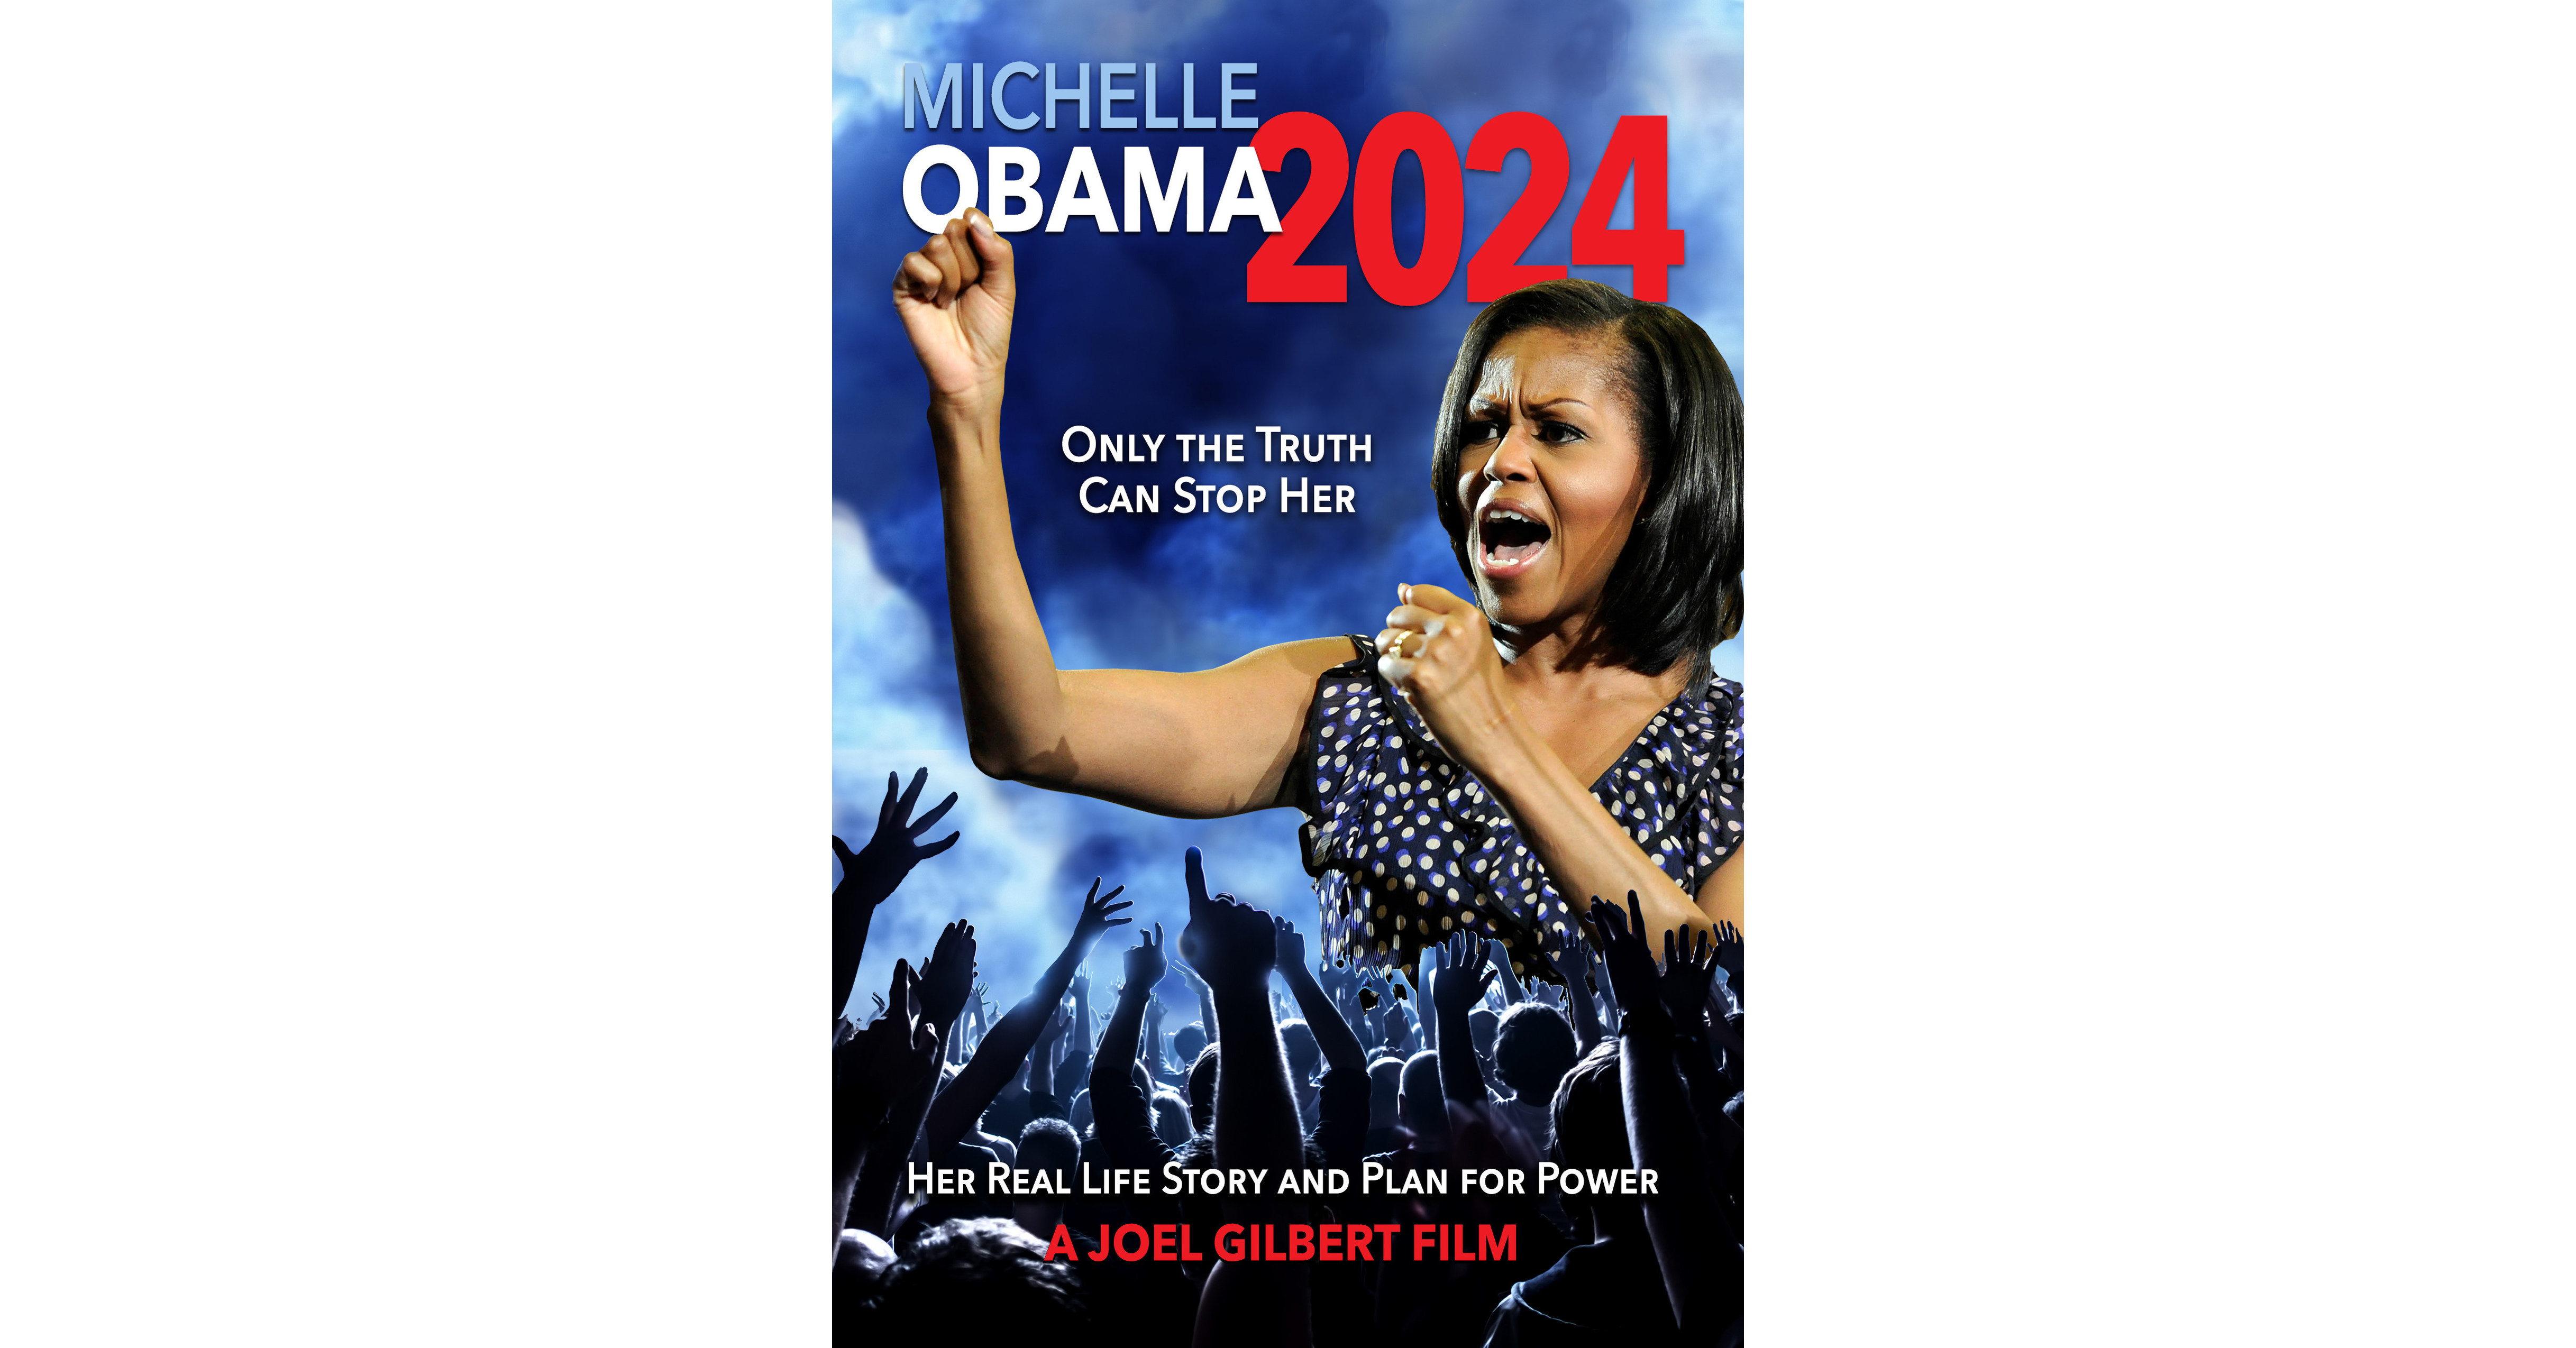 MICHELLE OBAMA 2024 Her Real Life Story and Plan for Power Film